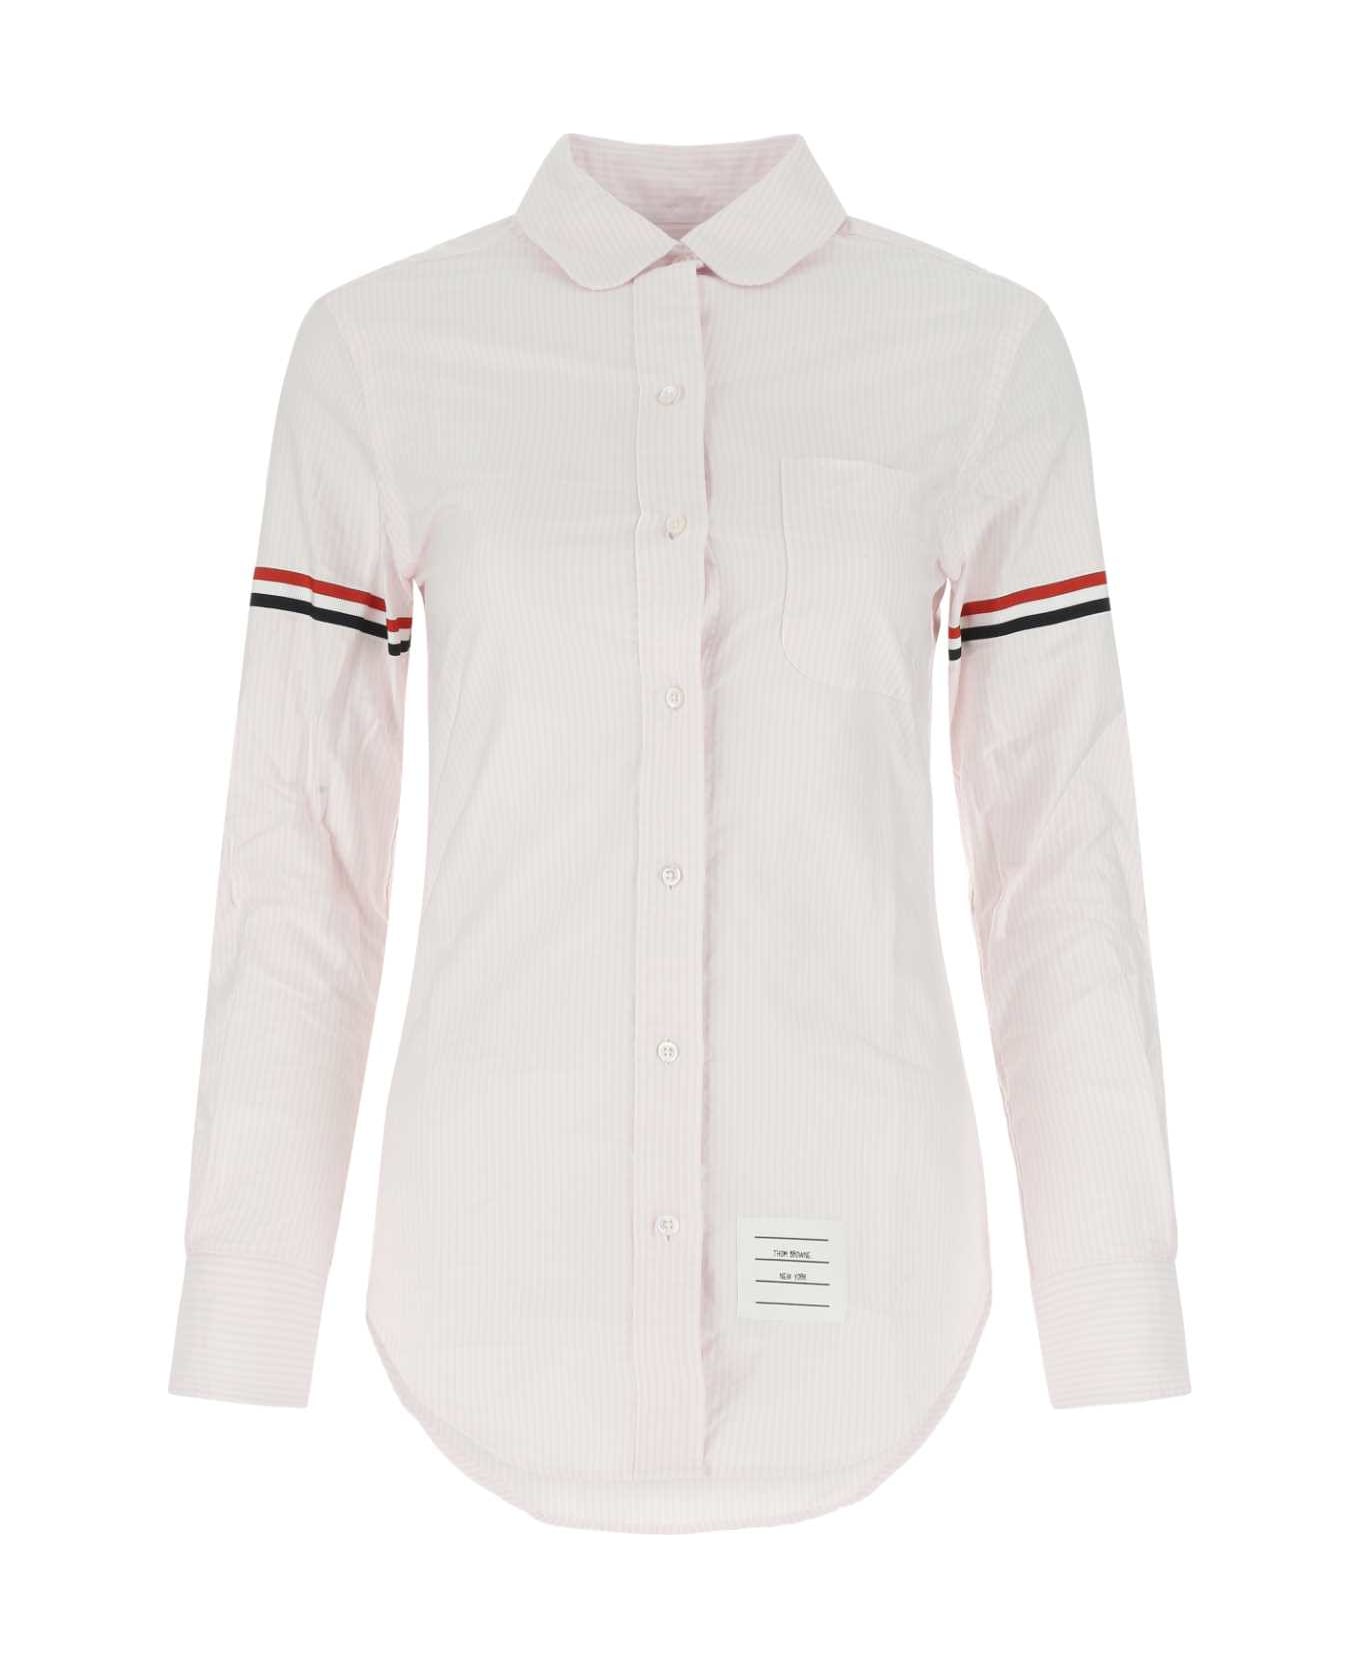 Thom Browne Embroidered Cotton Shirt - LTPINK